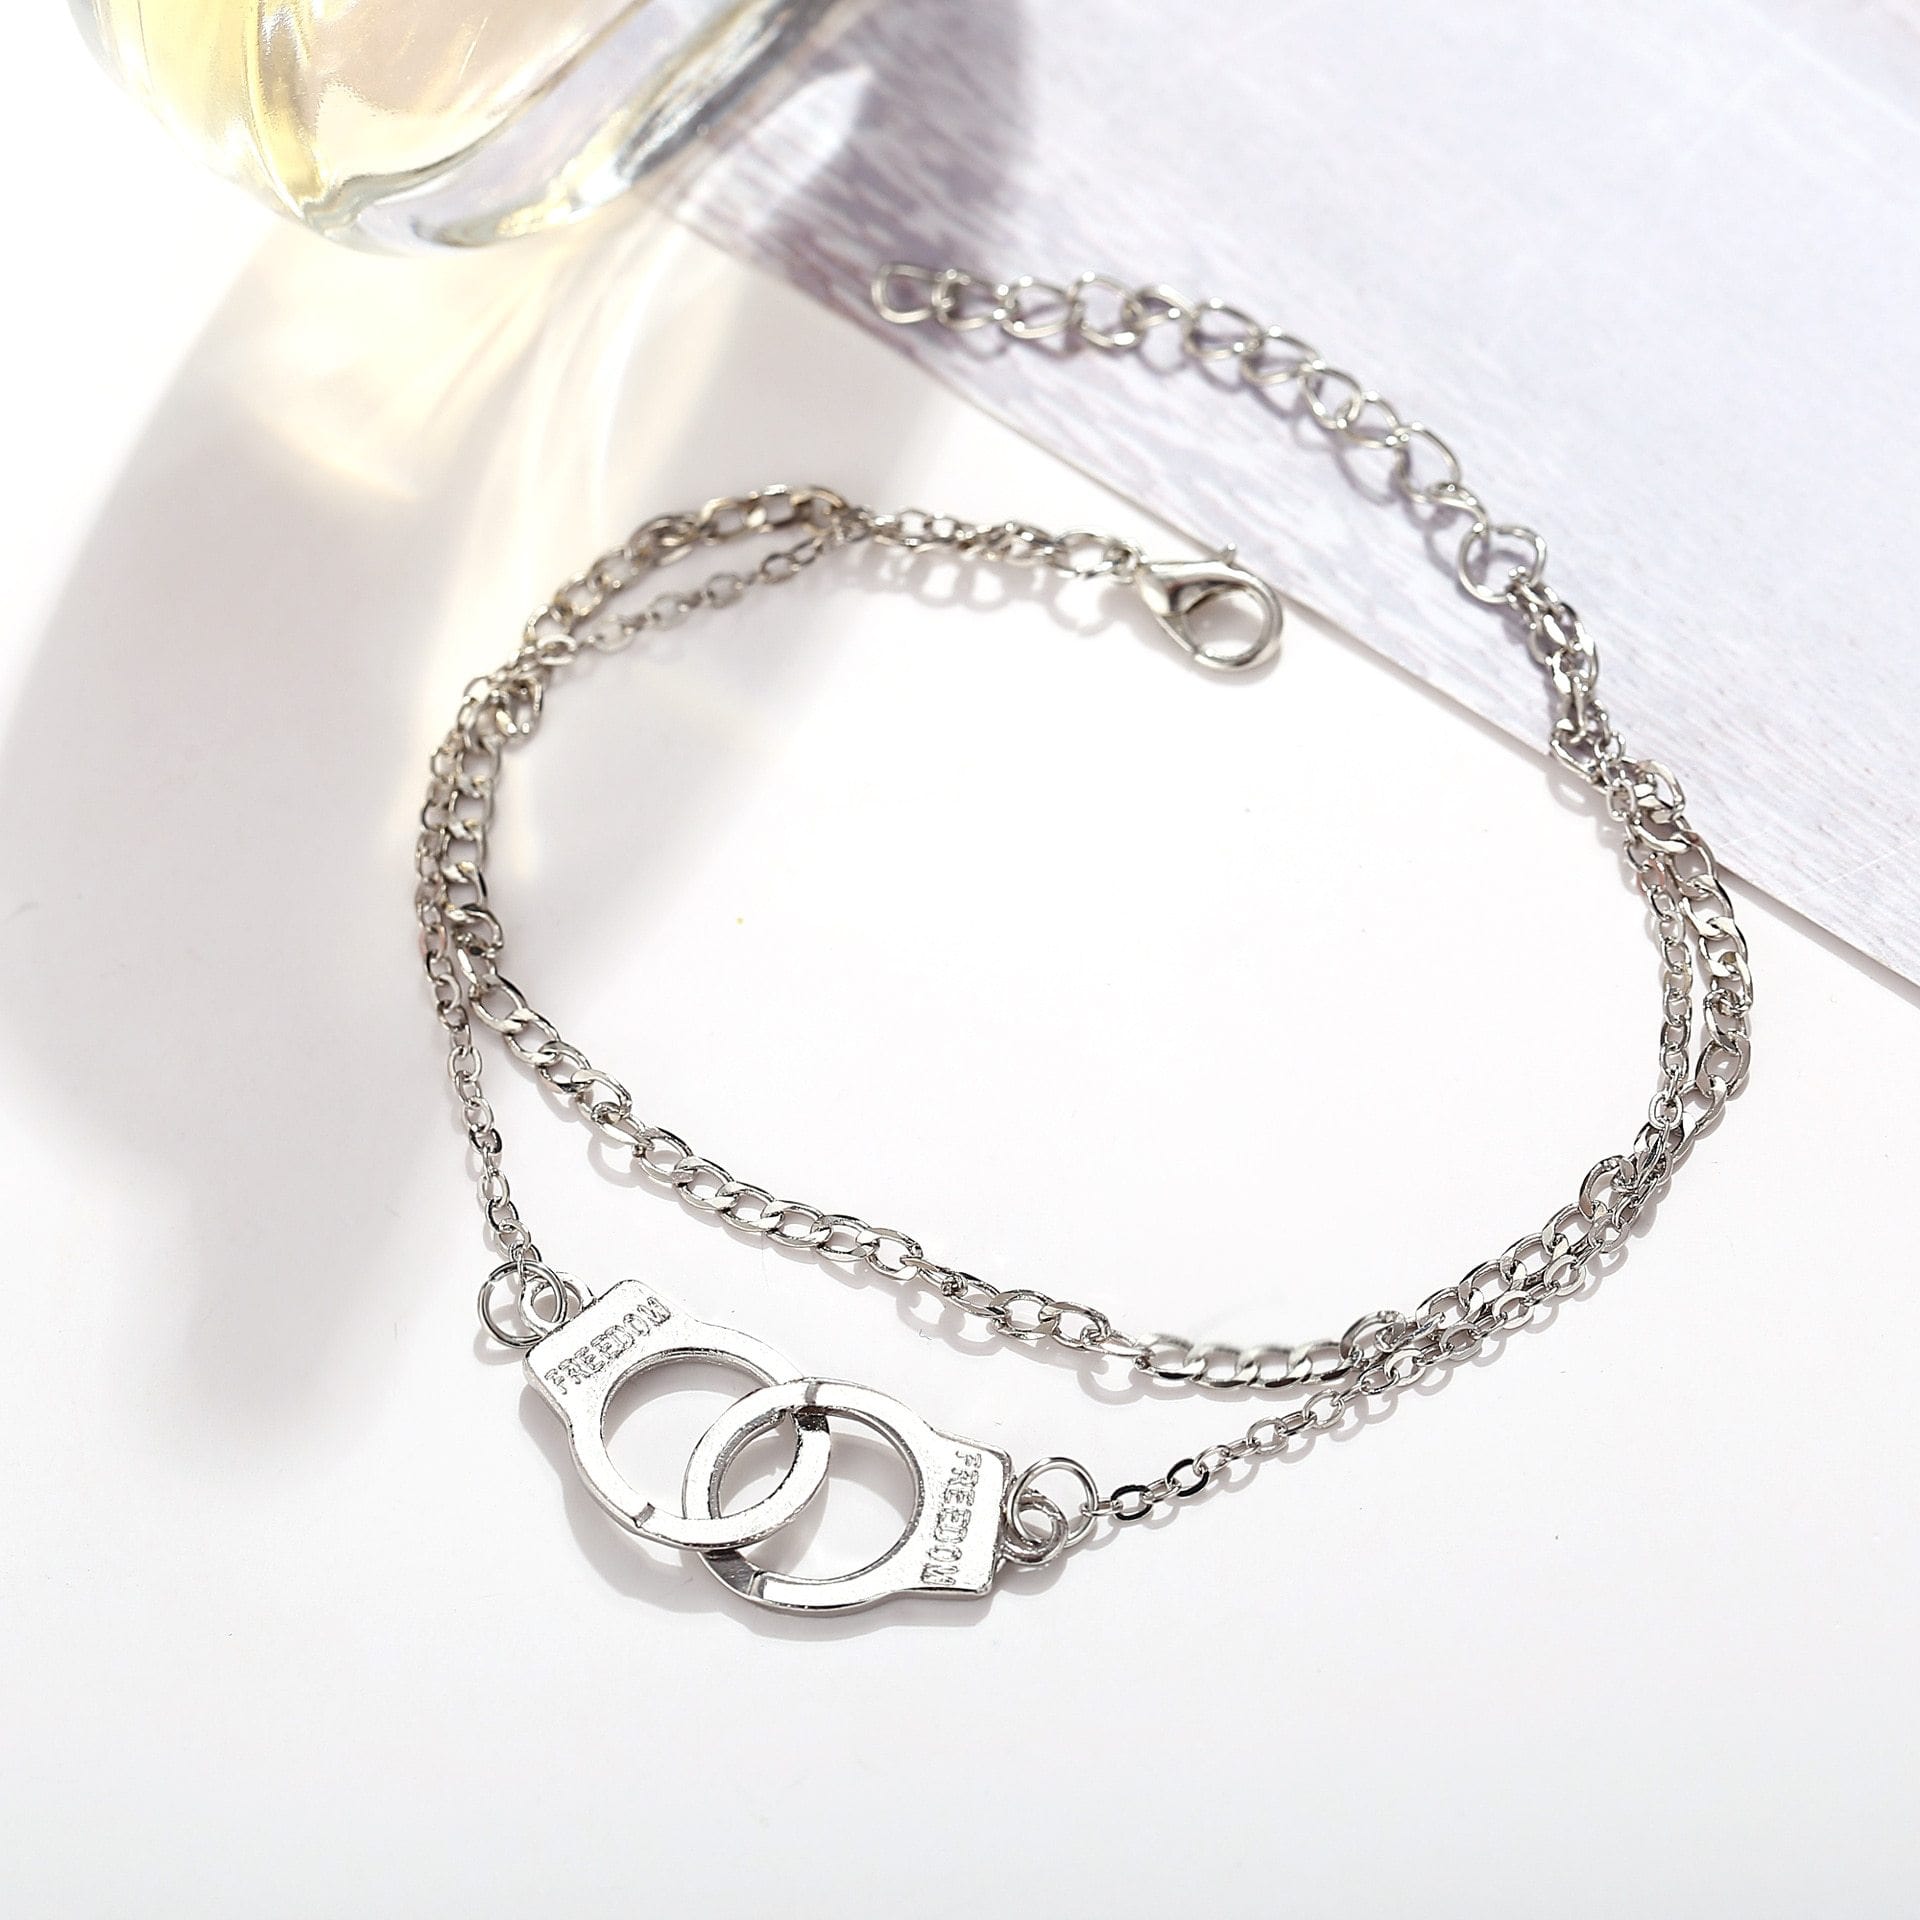 You are looking at an image of handcuffs-inspired sexy anklets with a plant pattern in silver, 20+5cm in length, from Miss JQ.